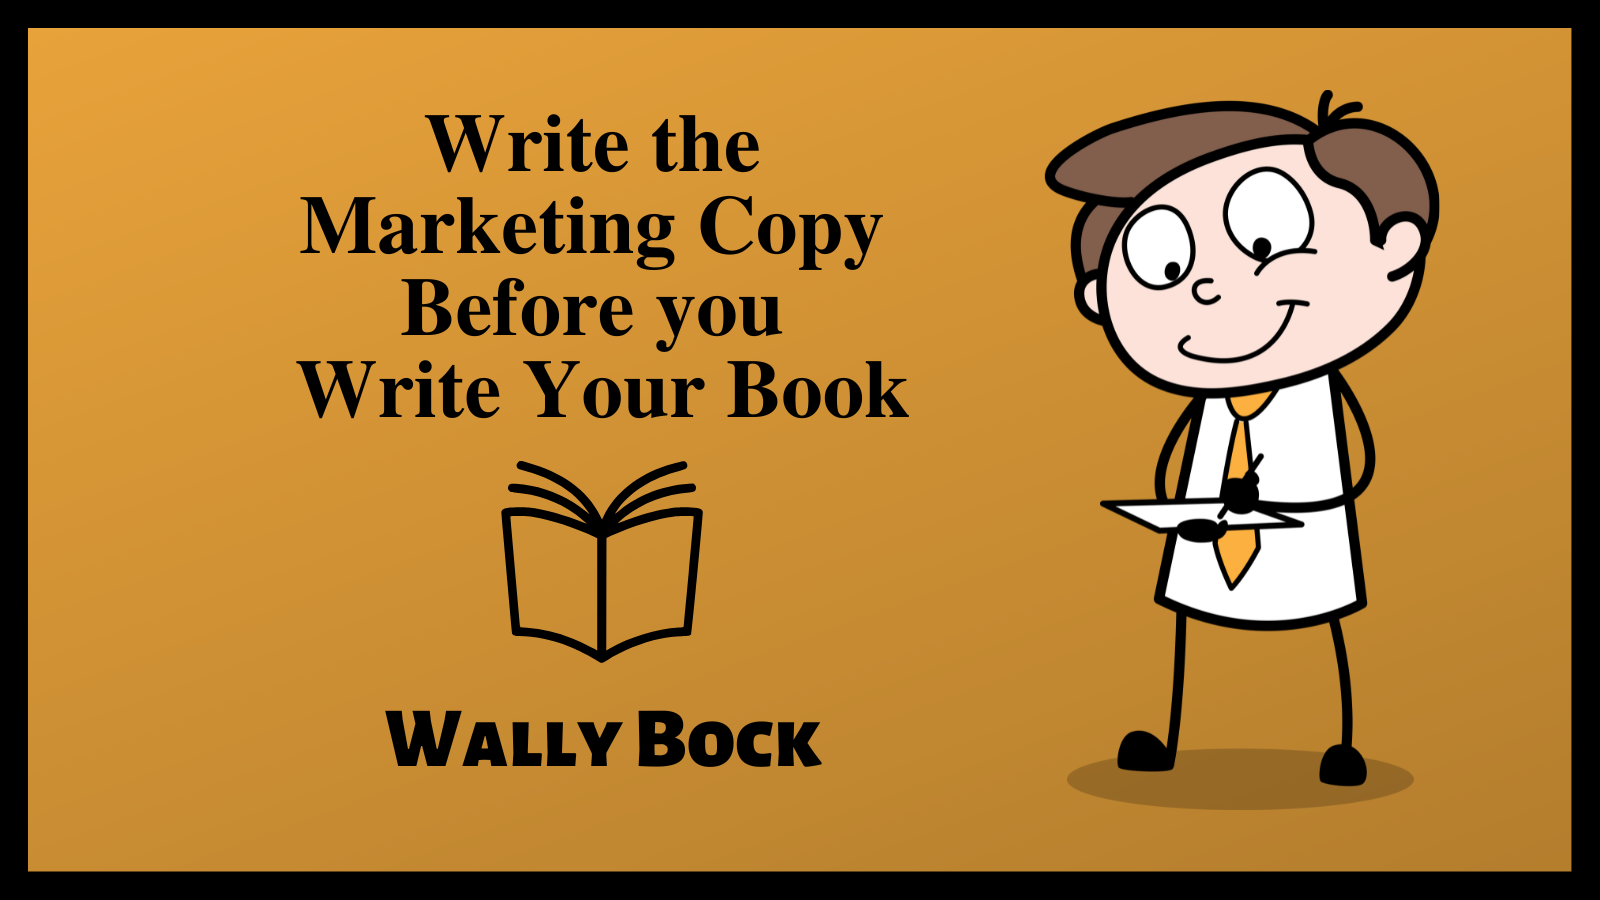 Write the marketing copy before you write your book